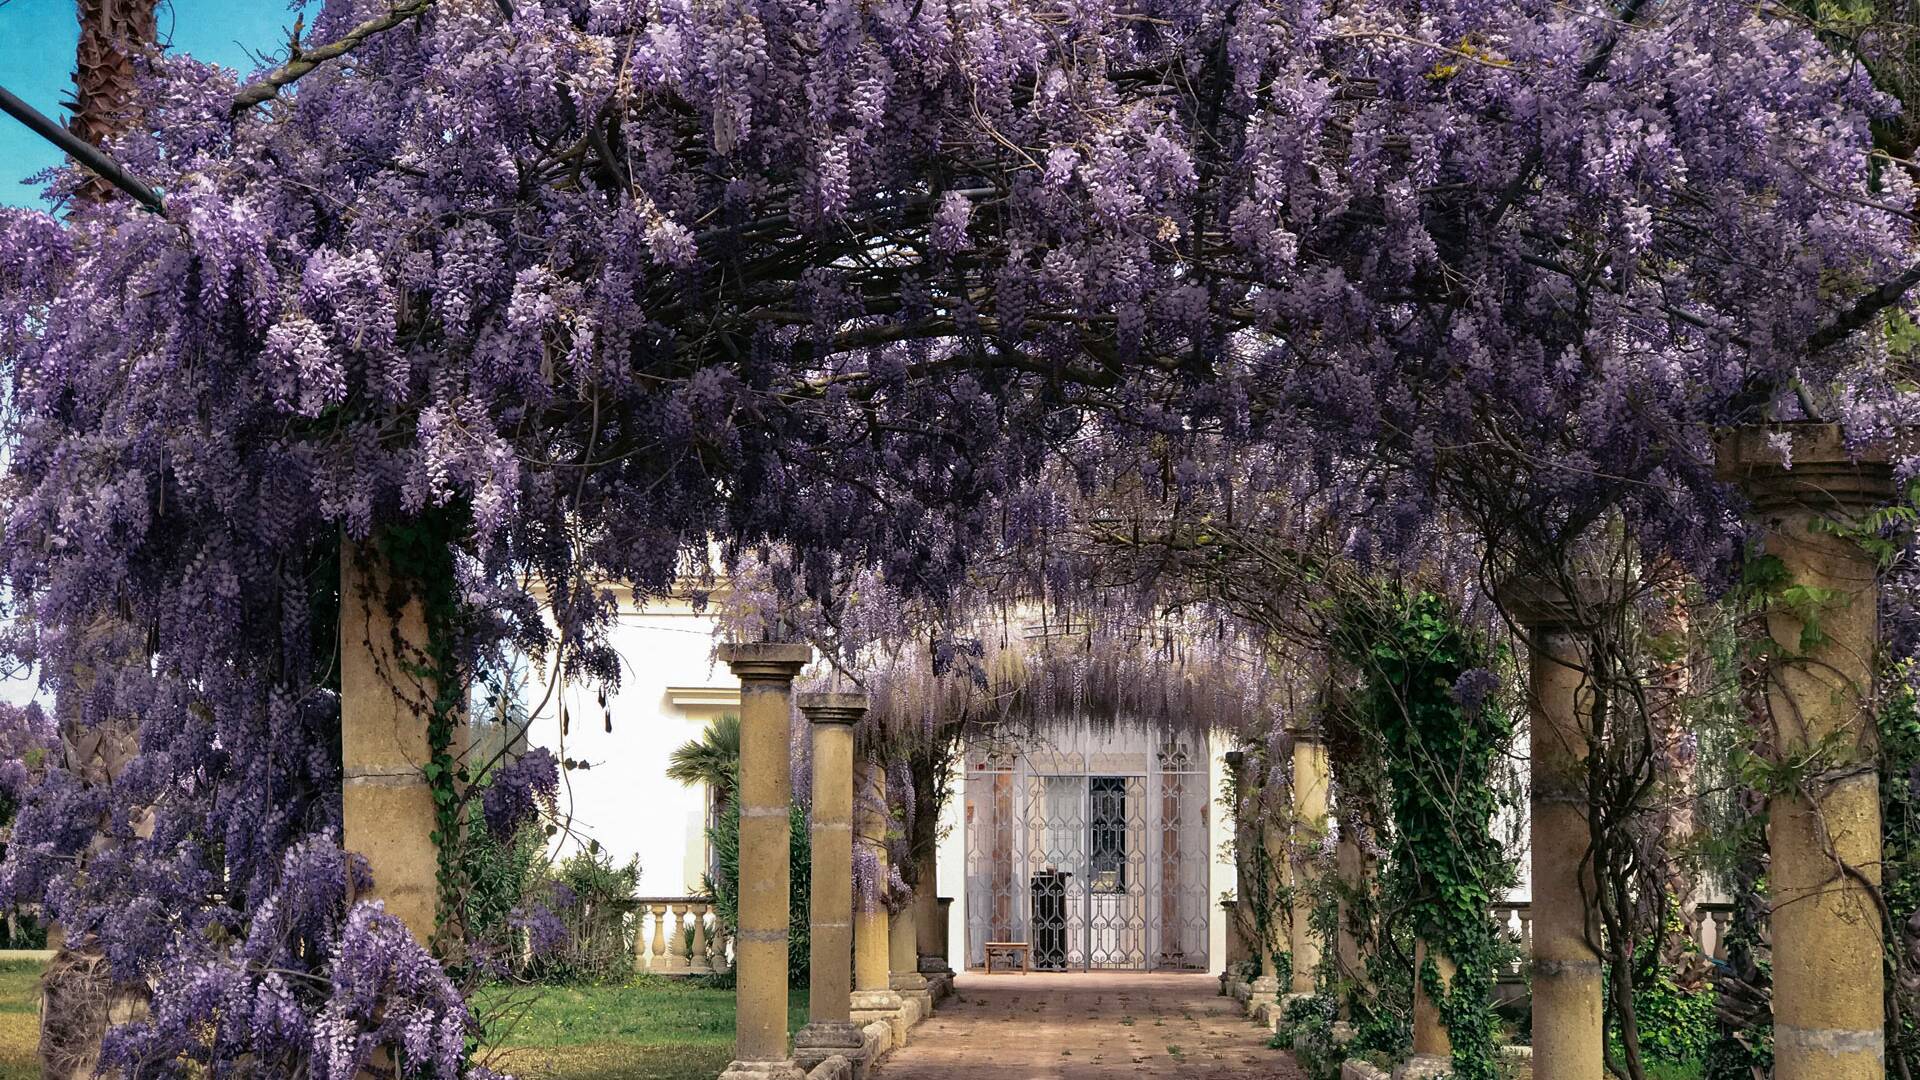 entrance to main villa with lavender in bloom